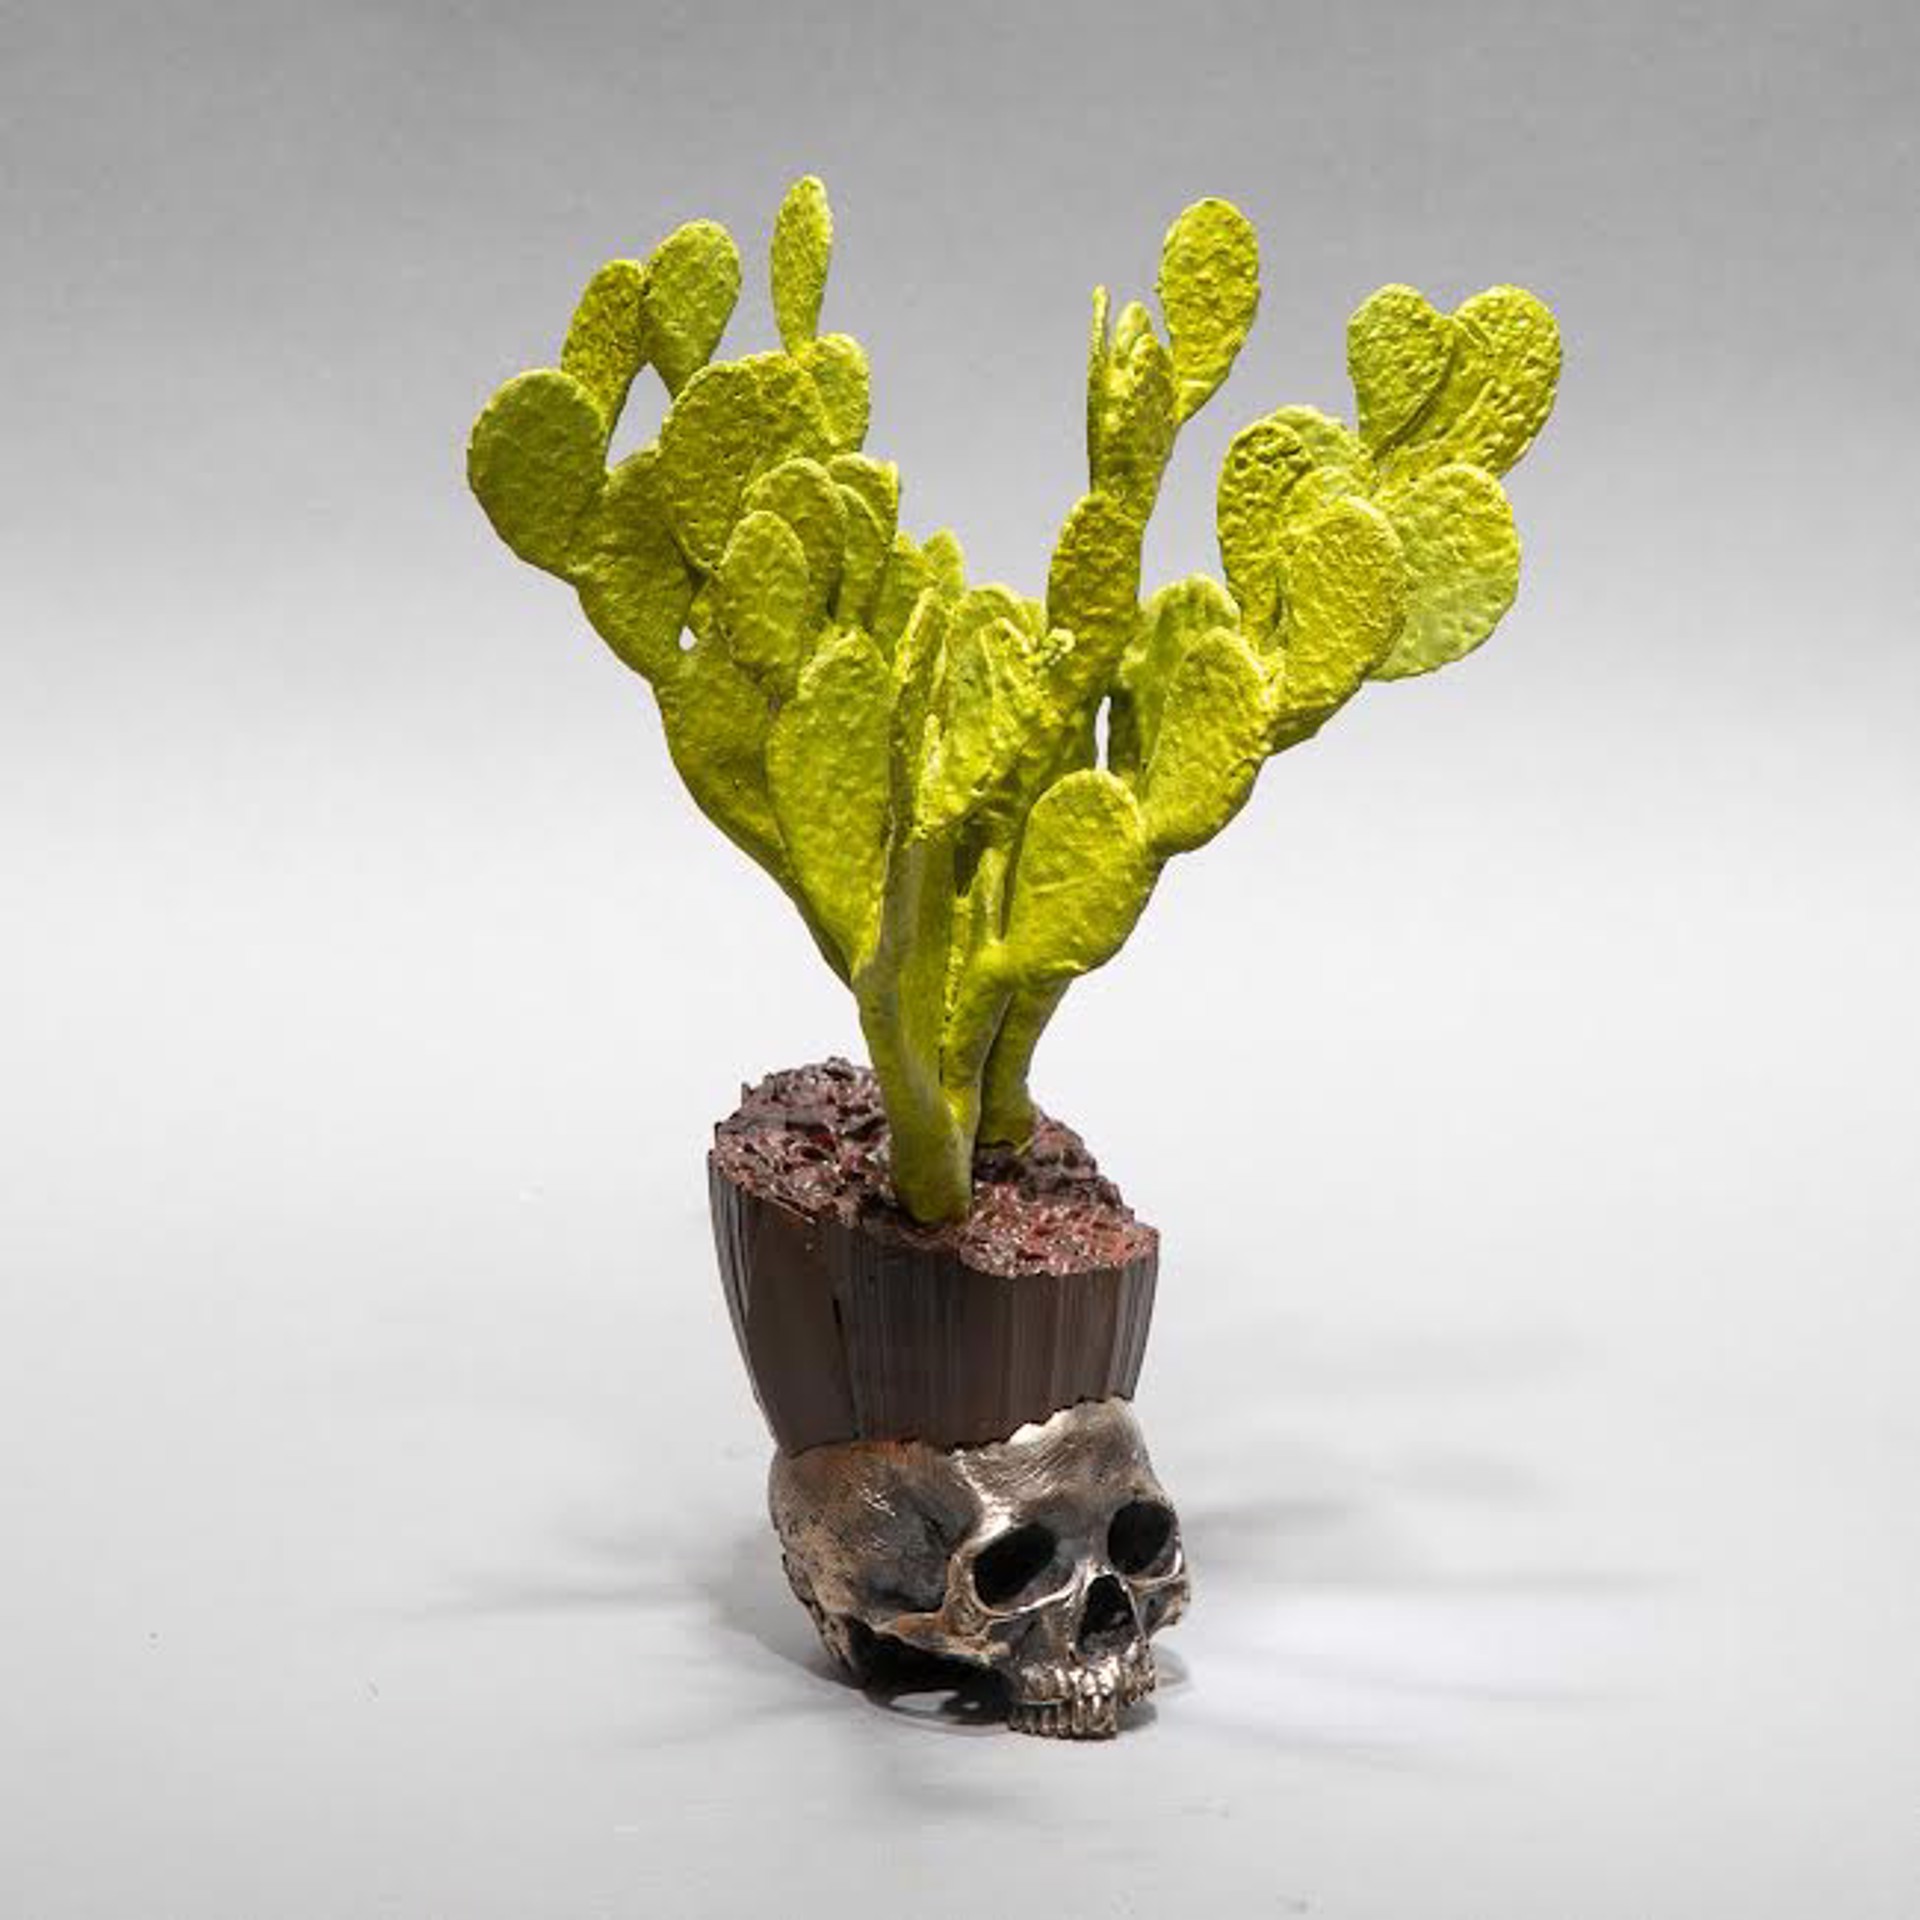 "Cactus Skull 7" by Dana Younger